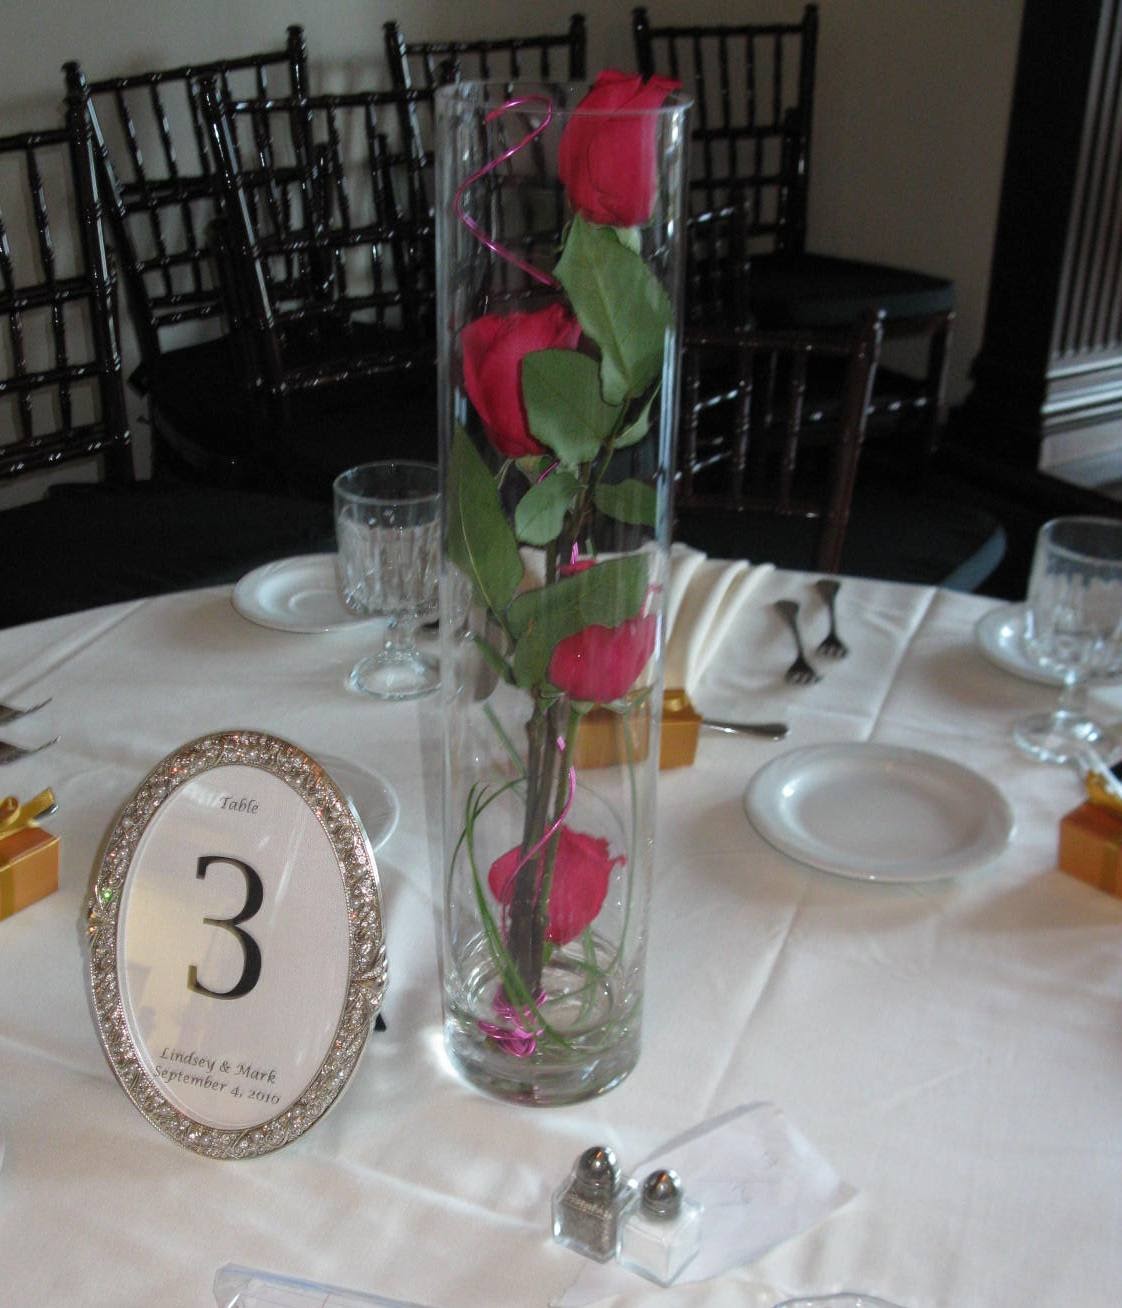 of centerpieces on them.